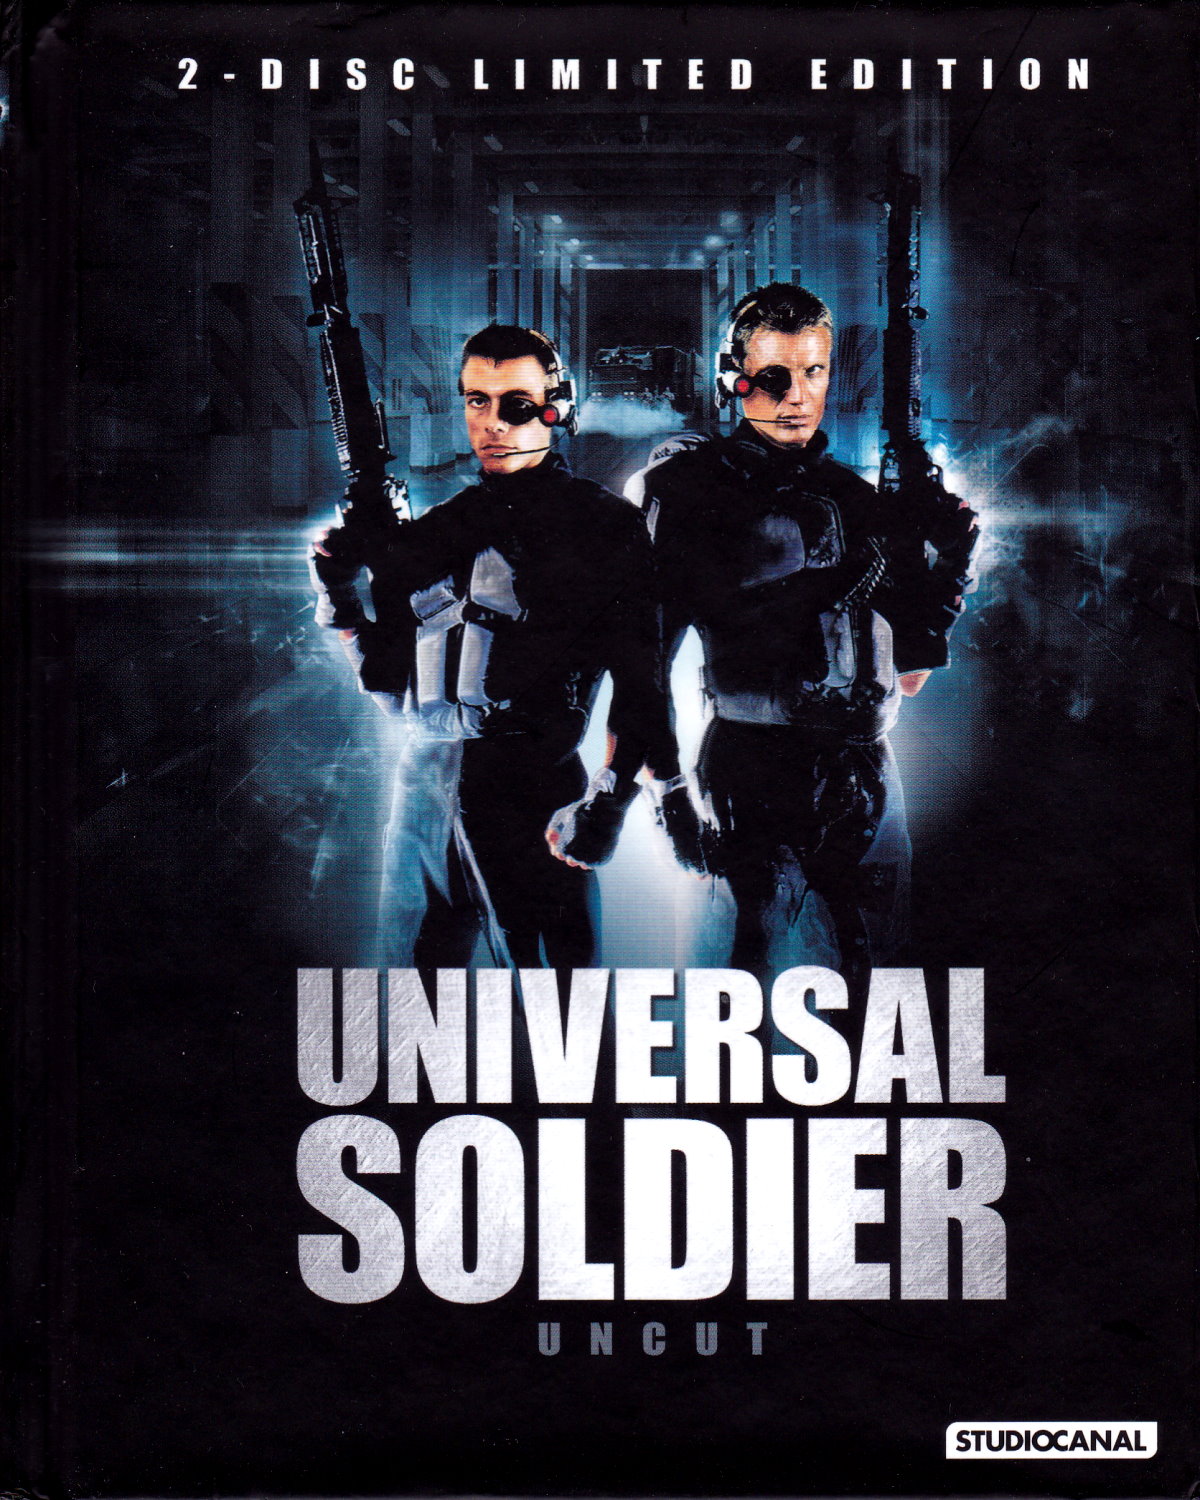 Cover - Universal Soldier.jpg